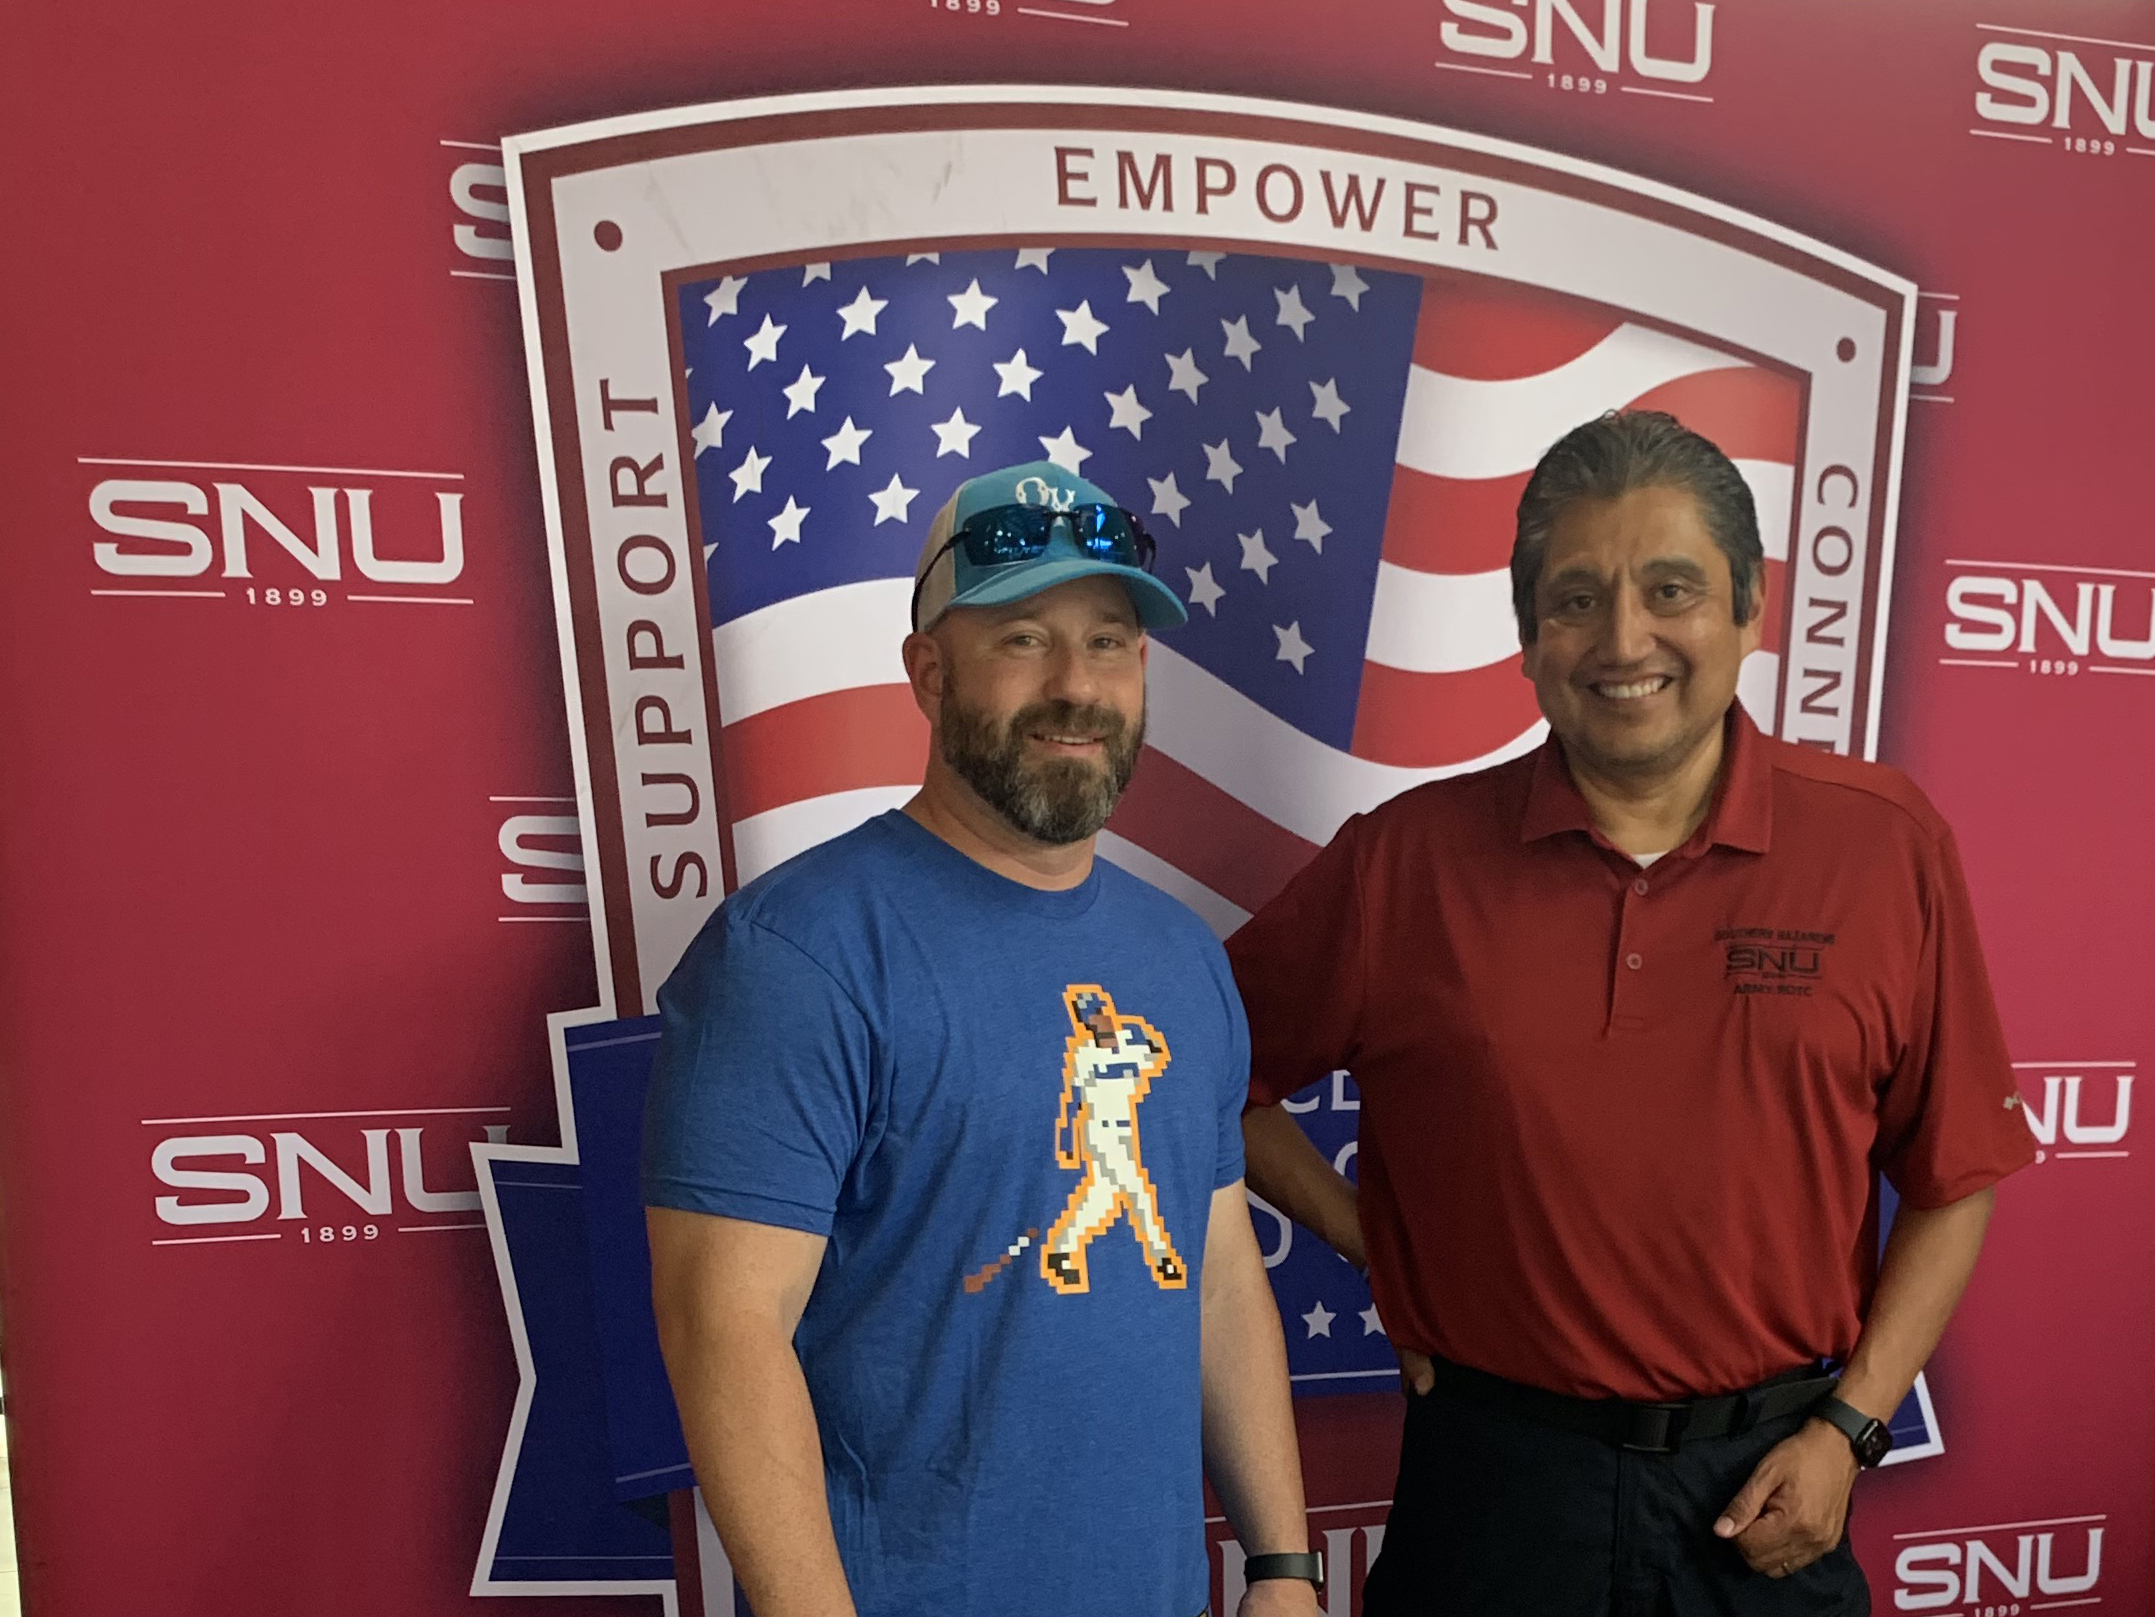 Air Force Veteran helping at the SNU VETS Center